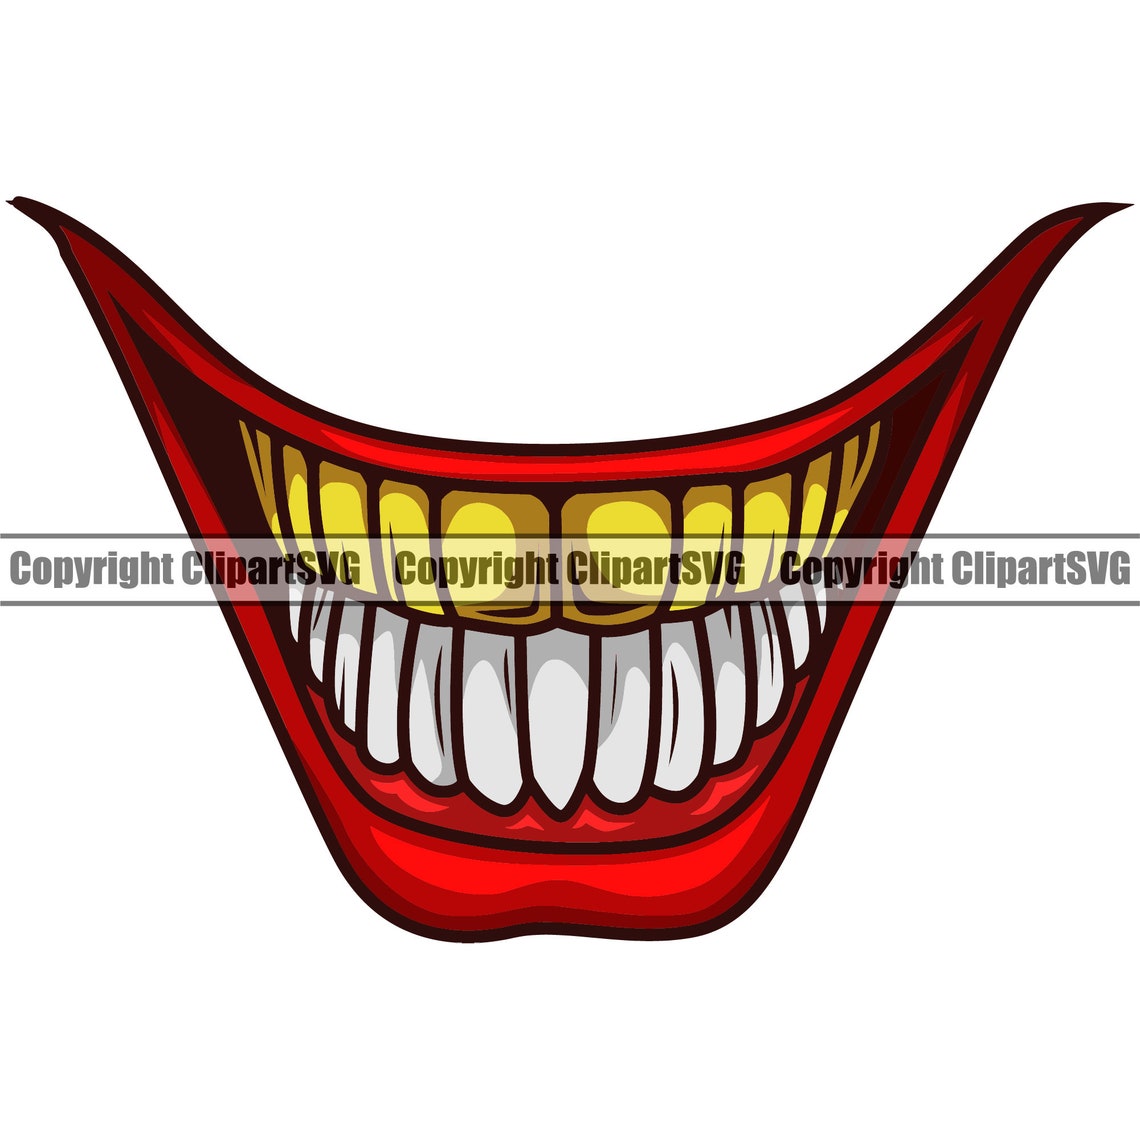 Joker Smile Gold Teeth Thug Clown Scary Mouth Mask Evil Grin - Etsy